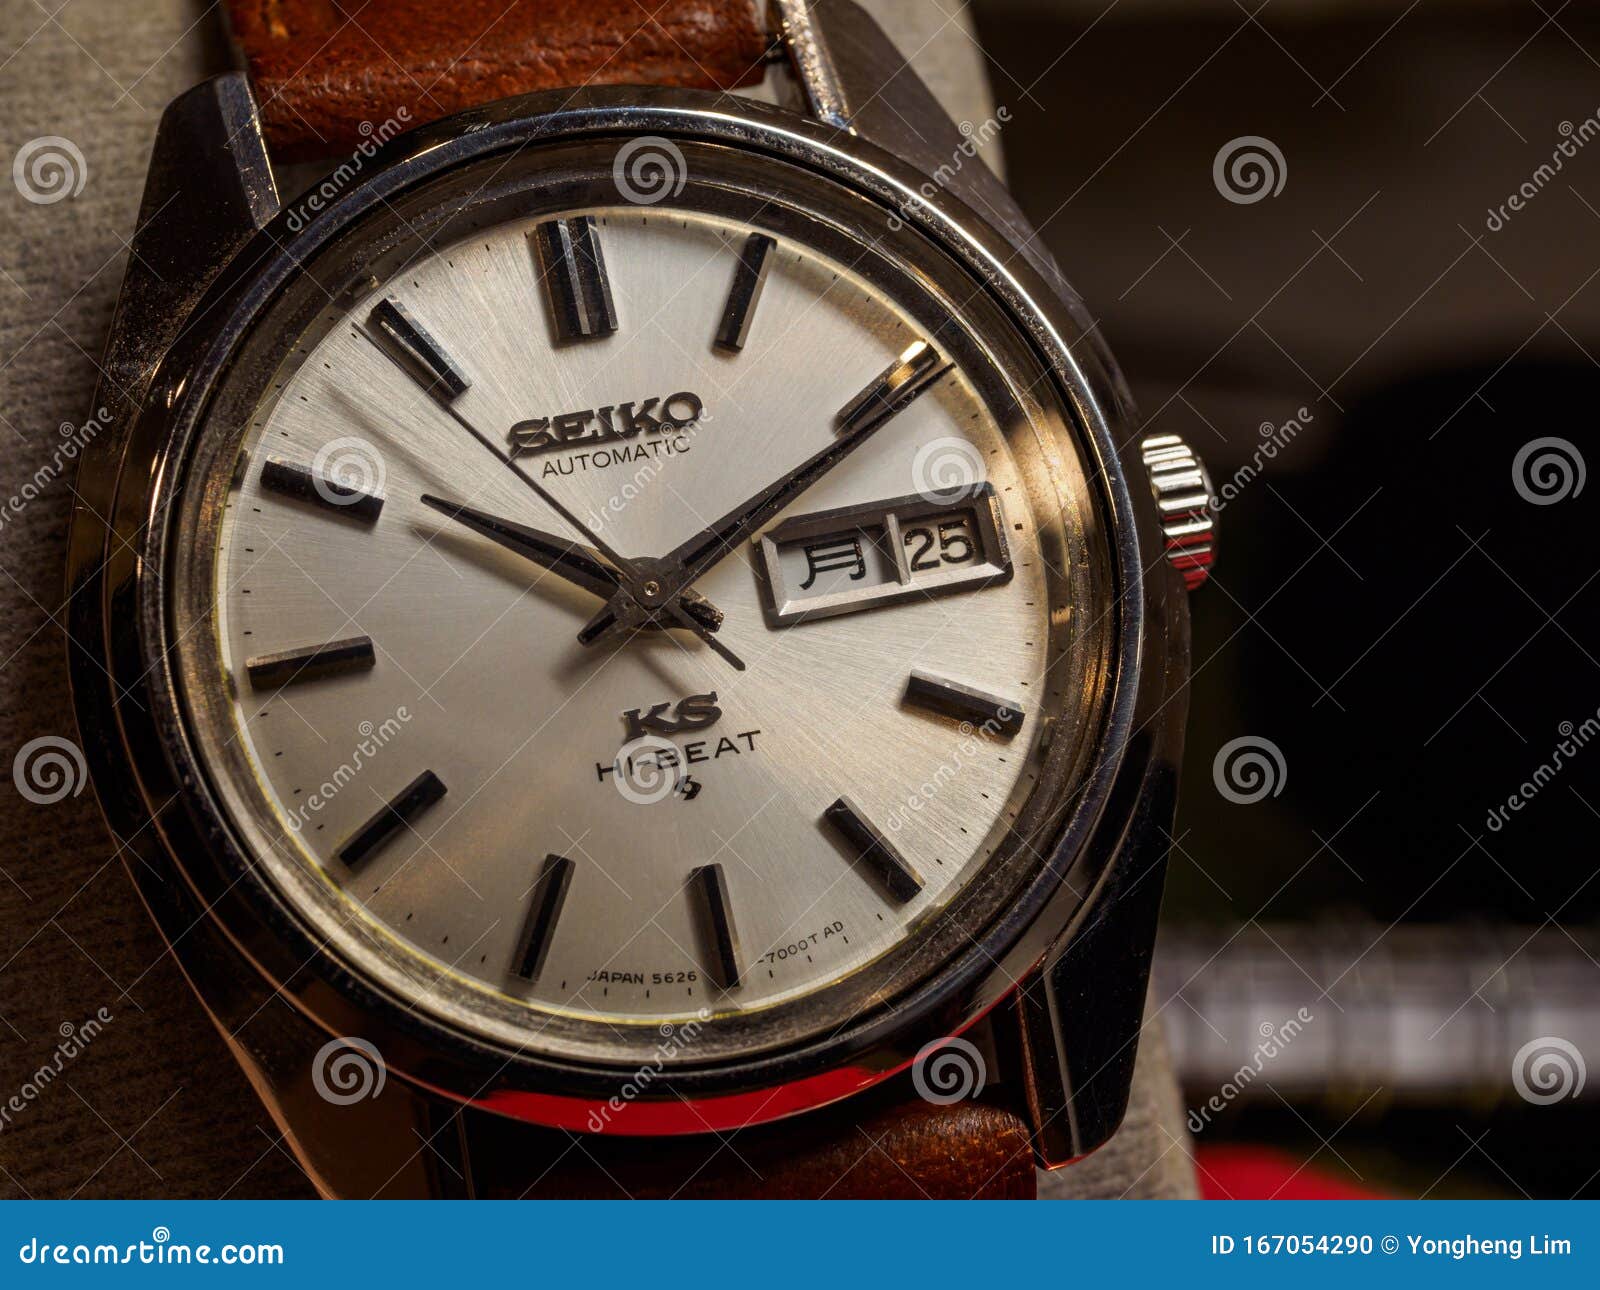 Close-up of a Vintage King Seiko Watch from the 70s with Copy Space  Editorial Image - Image of japanese, japan: 167054290